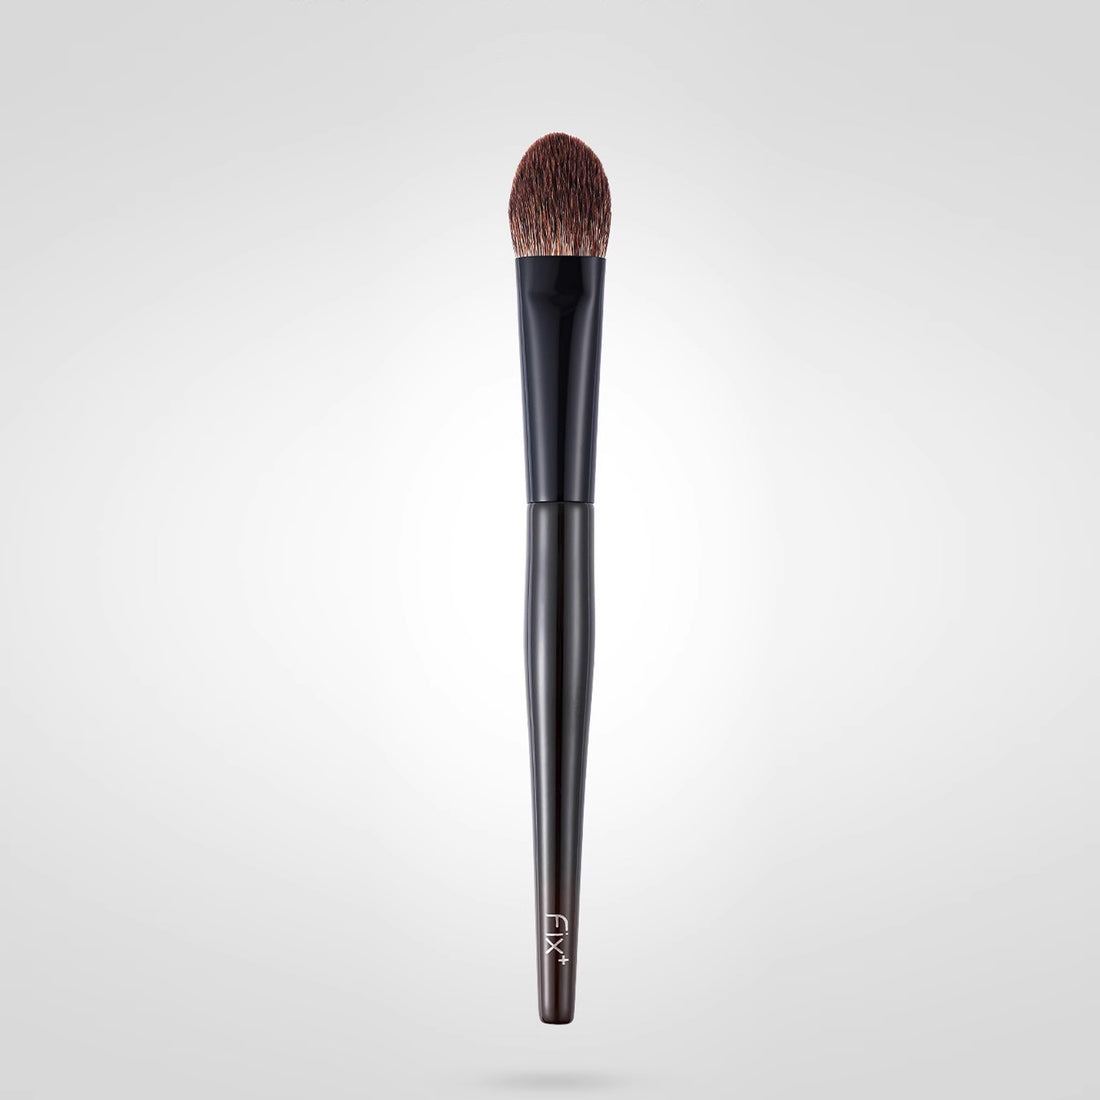 FiX  Wool Heart Brush for Highlighter and Blush MN-19